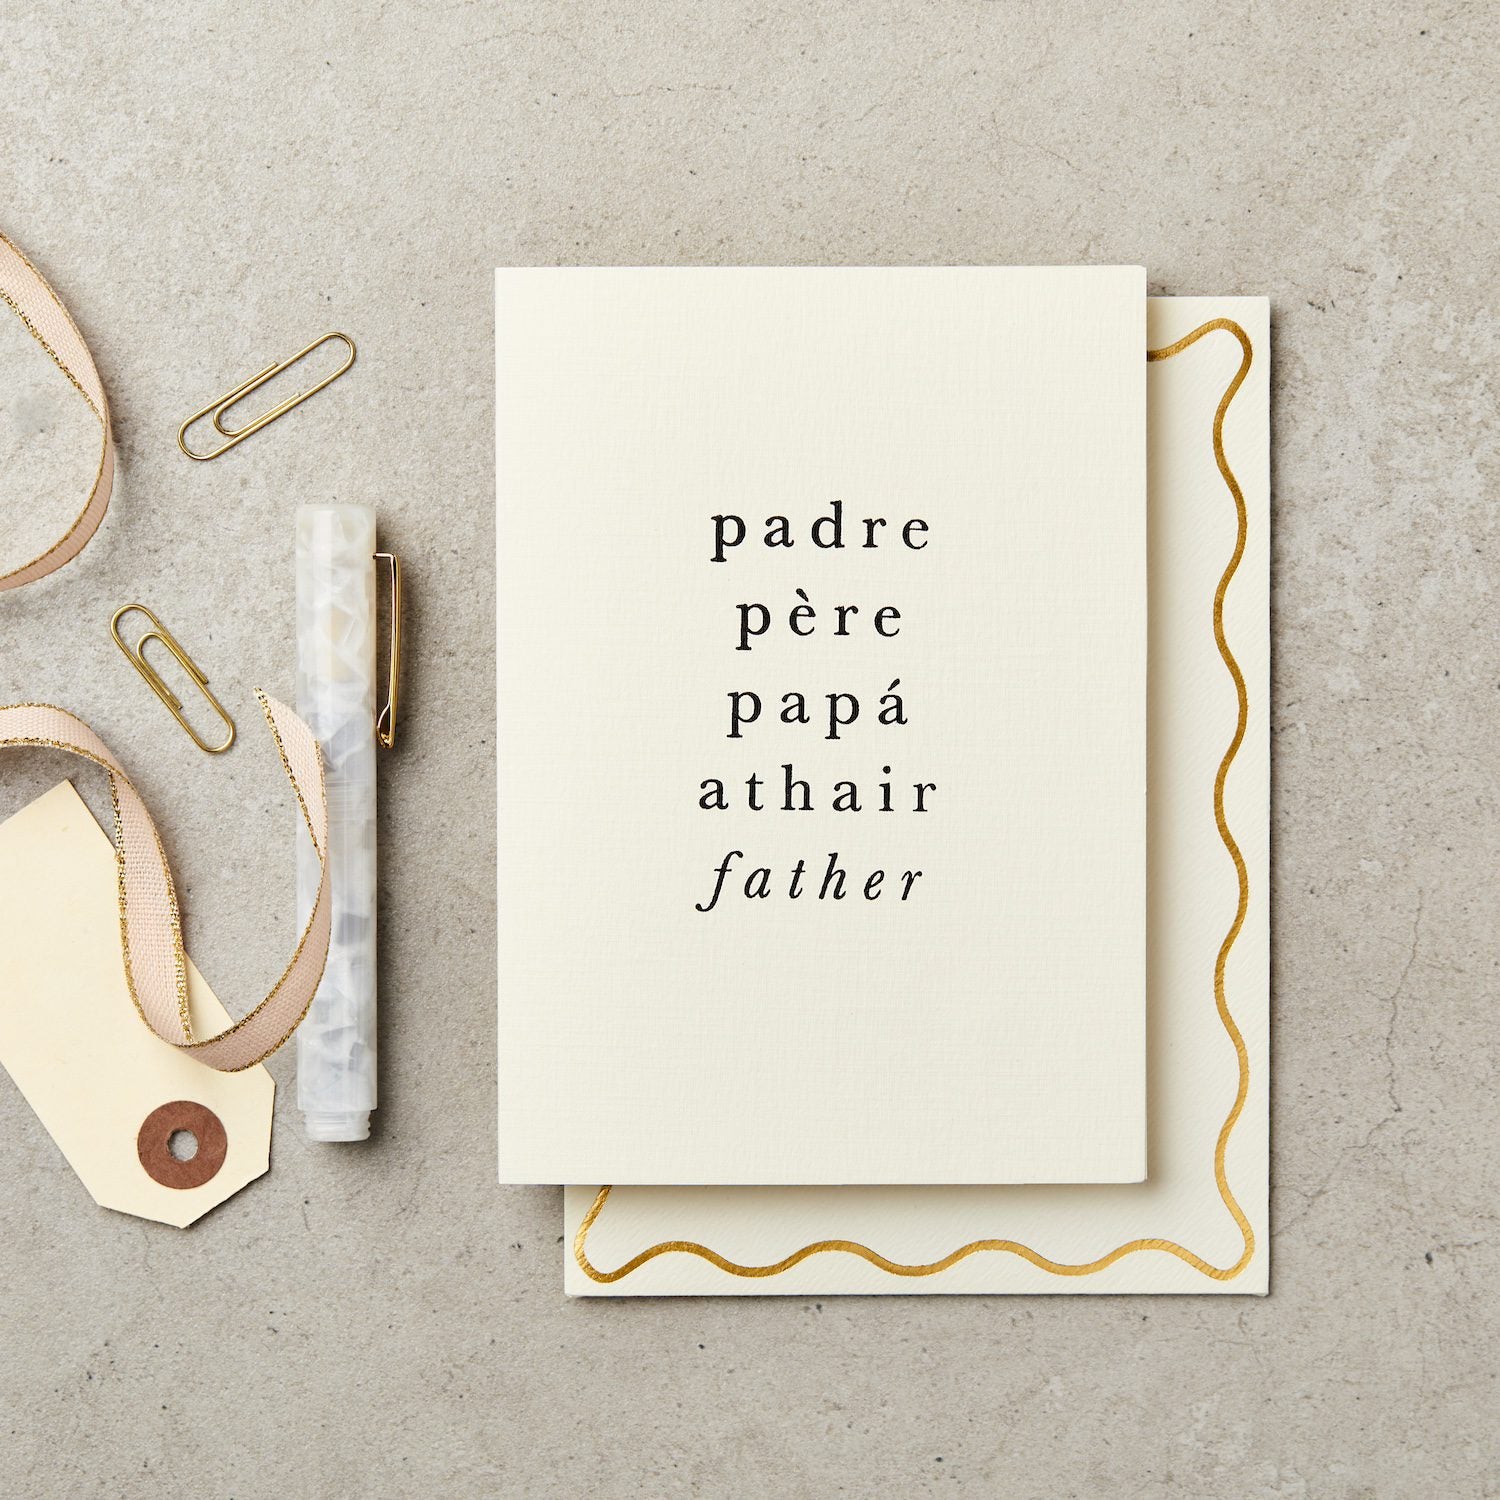 PADRE - FATHER | CARD BY KATIE LEAMON